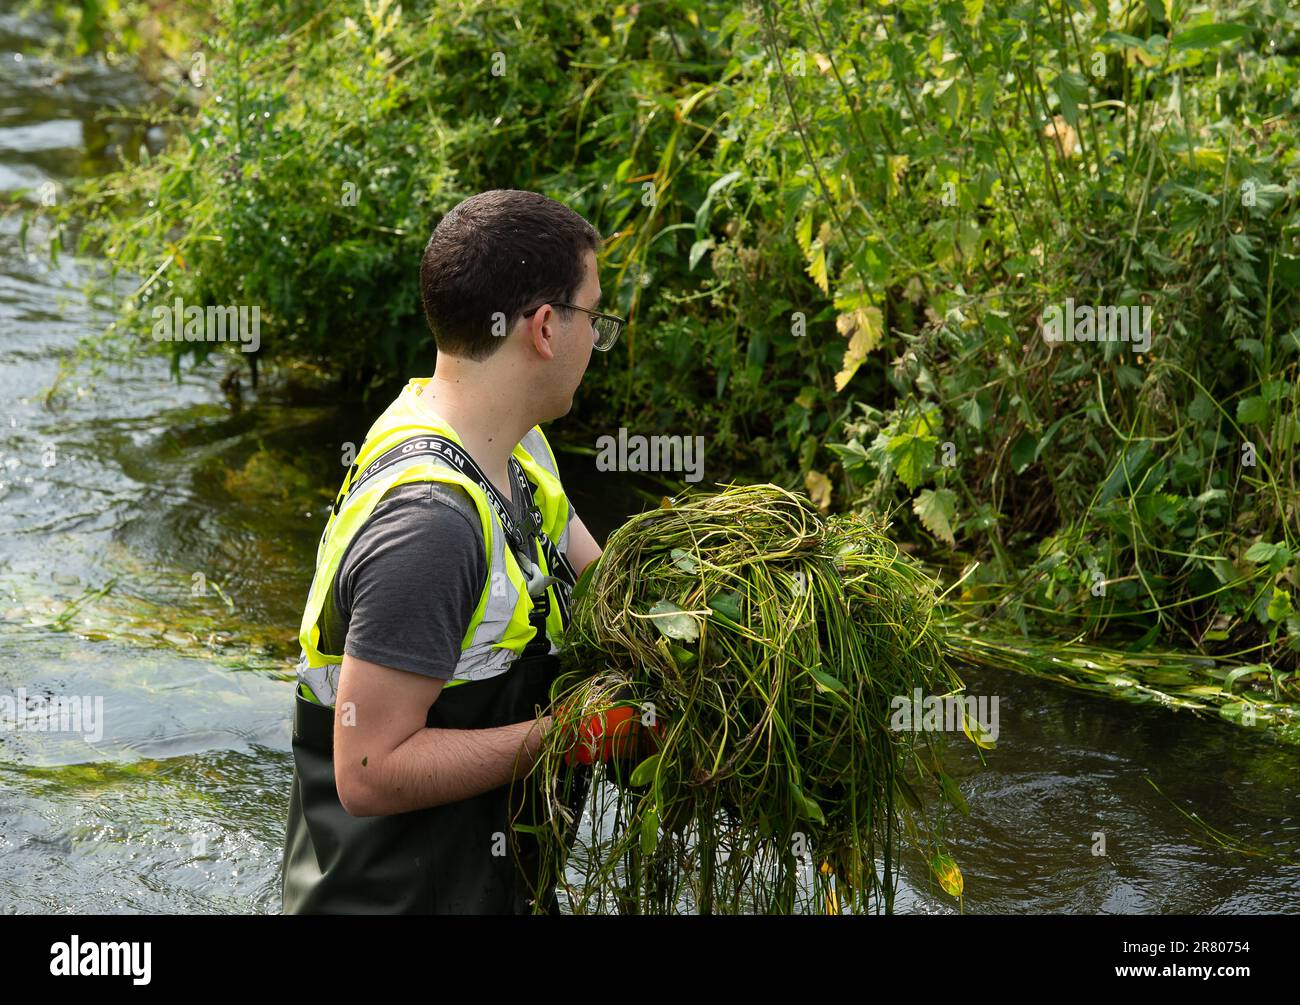 Eton Wick, UK. 18th June, 2023. Local residents and volunteers from the Eton Wick Waterways Group near Windsor in Berkshire who are supported by Thames 21, were clearing weeds from Boveney Ditch in Eton Wick today so as to improve the flow of water in the waterway. They work to conserve and protect  the natural environment and wildlife surrounding the Eton Wick waterways. Joining them to clear the weeds were newly elected Windsor, Eton and Eton Wick Liberal Democrats Councillors, Devon Davies (pictured) and Mark Wilson. Frank O’Kelly a Councillor from nearby Slough also joined the clear up. Et Stock Photo